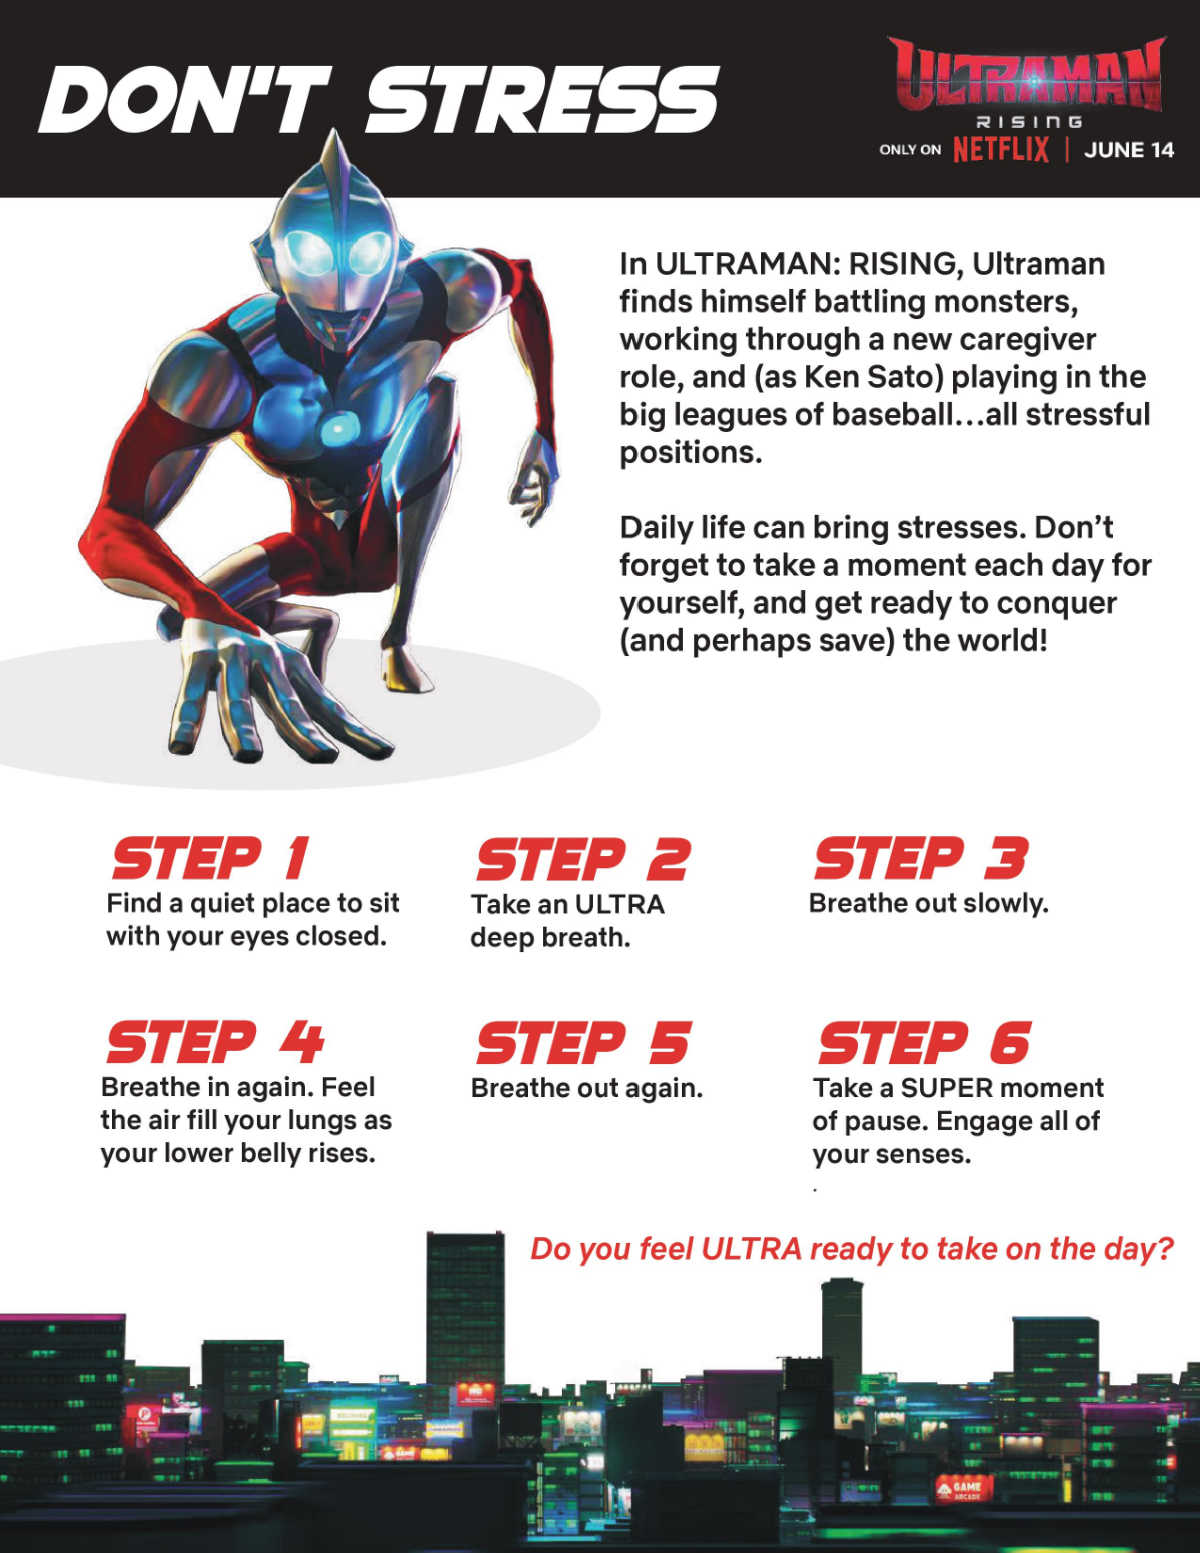 ultraman stress reduction activity page